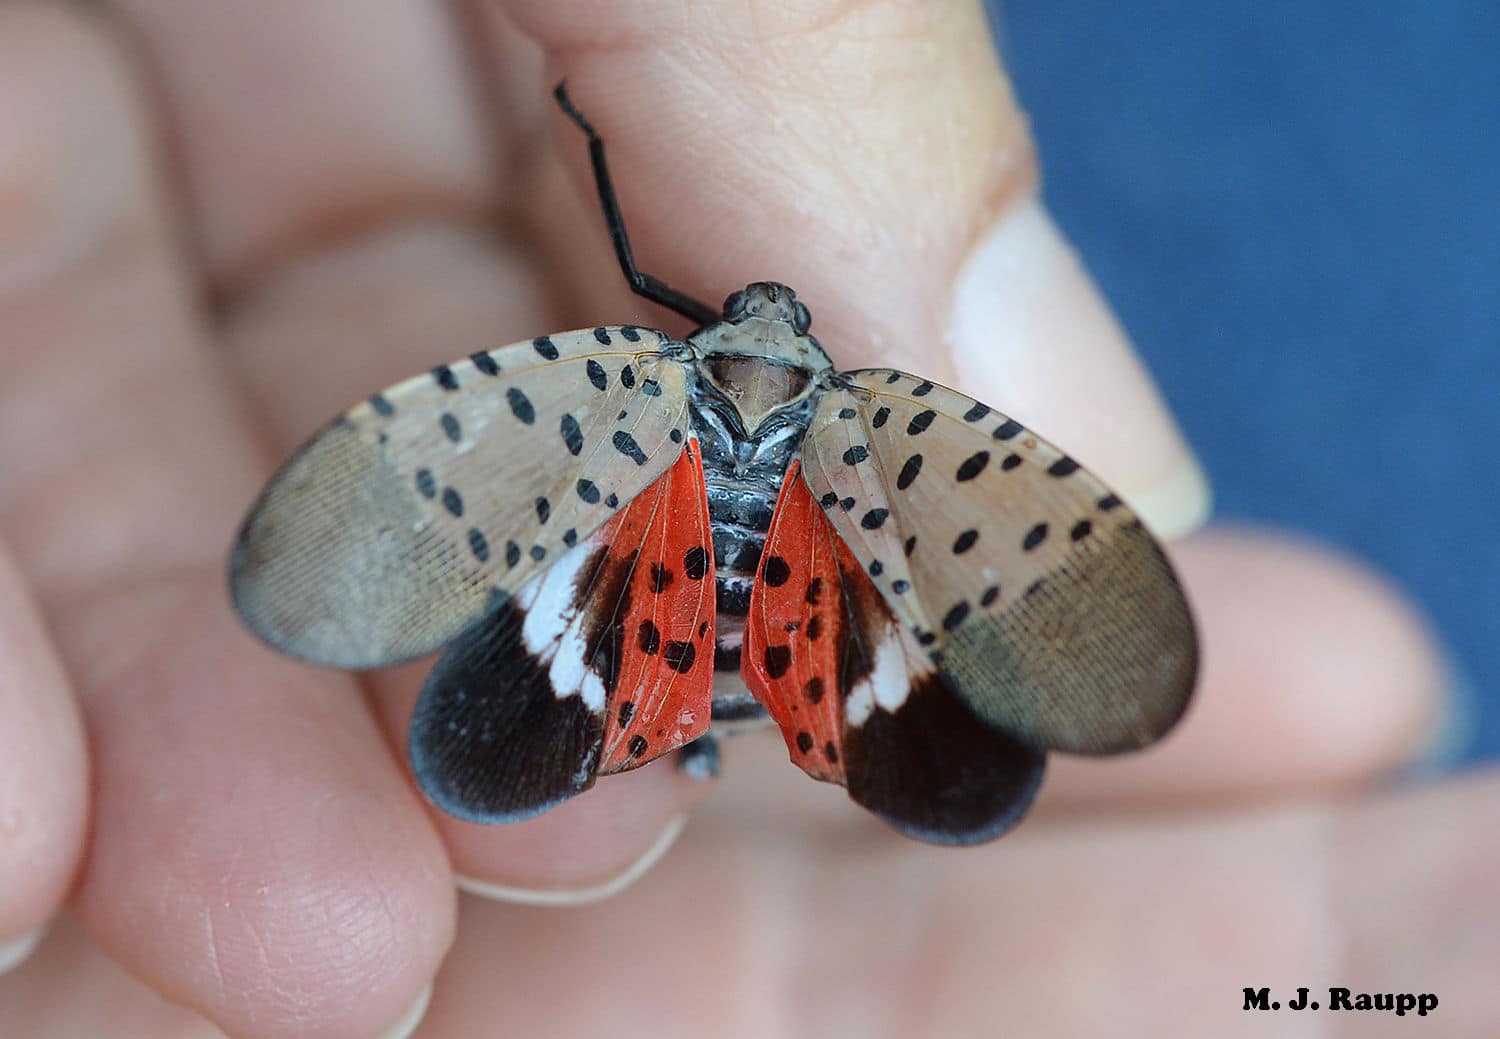 https://wtop.com/wp-content/uploads/2018/02/Spotted-Lanternfly.jpg